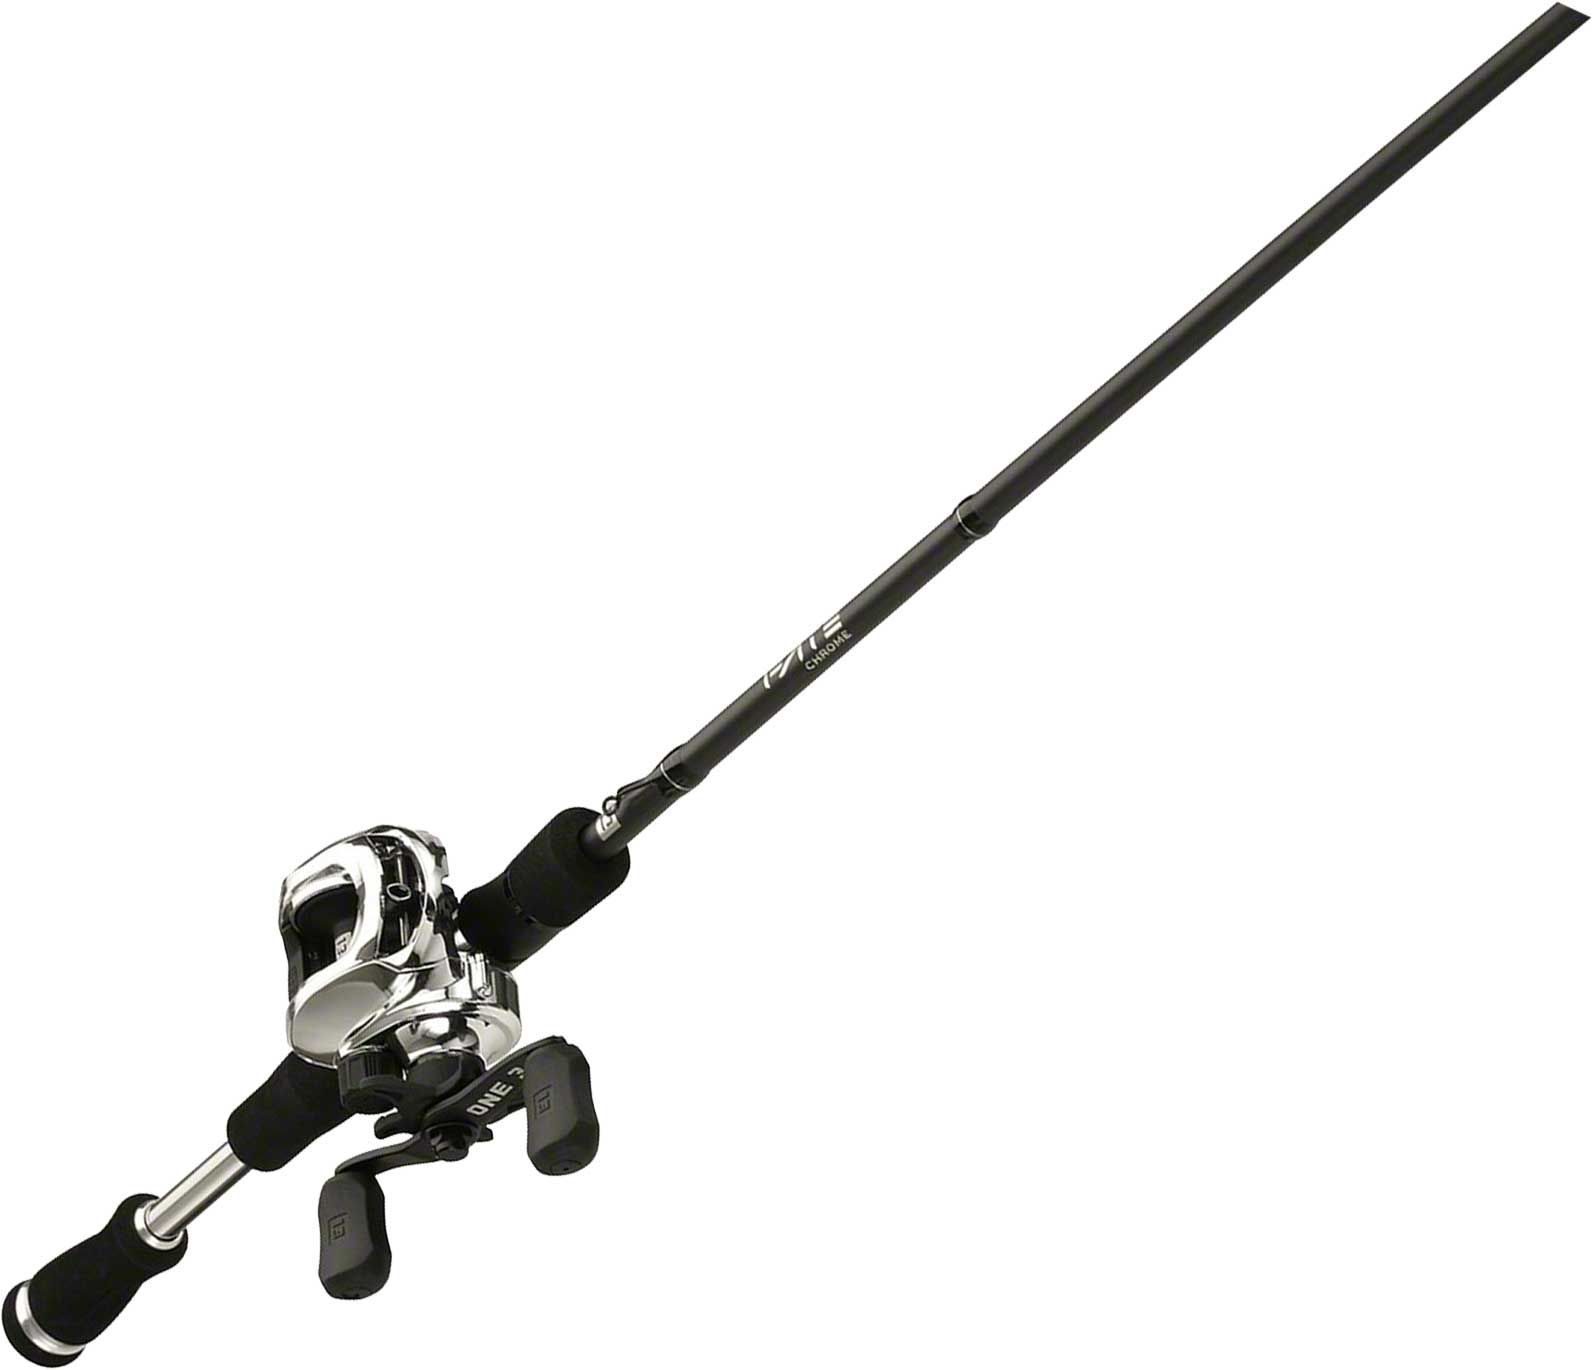 13 Fishing Fate FT Spinning Combo Rod